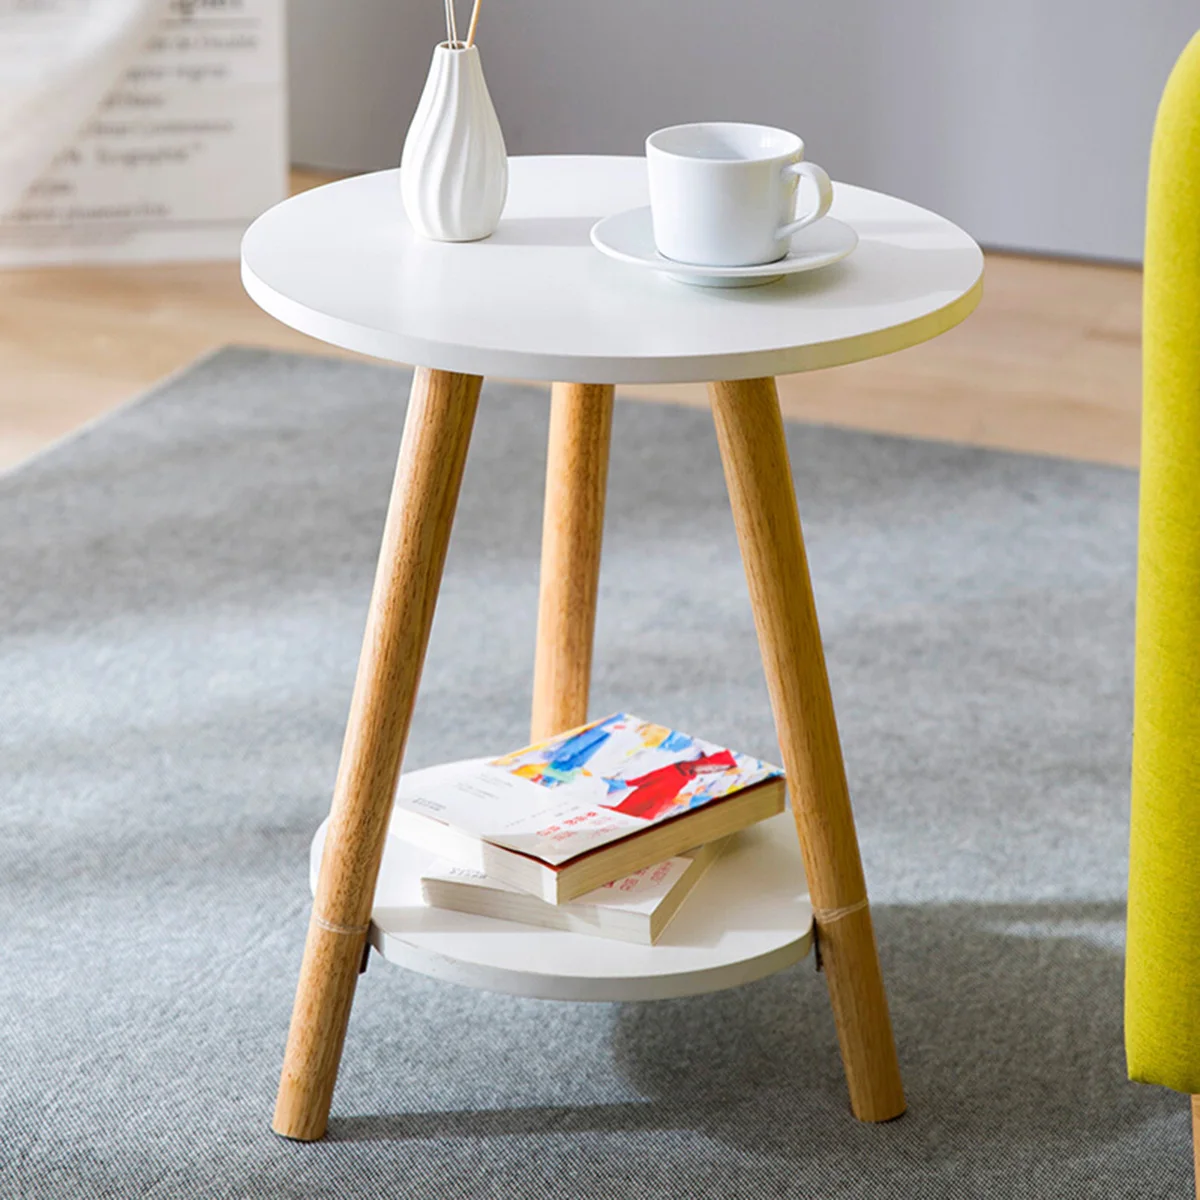 Nordic Style Mini Coffee Table Modern Minimalist Tea Table Creative Round Table Wood Table For Home Living Room White Yellow